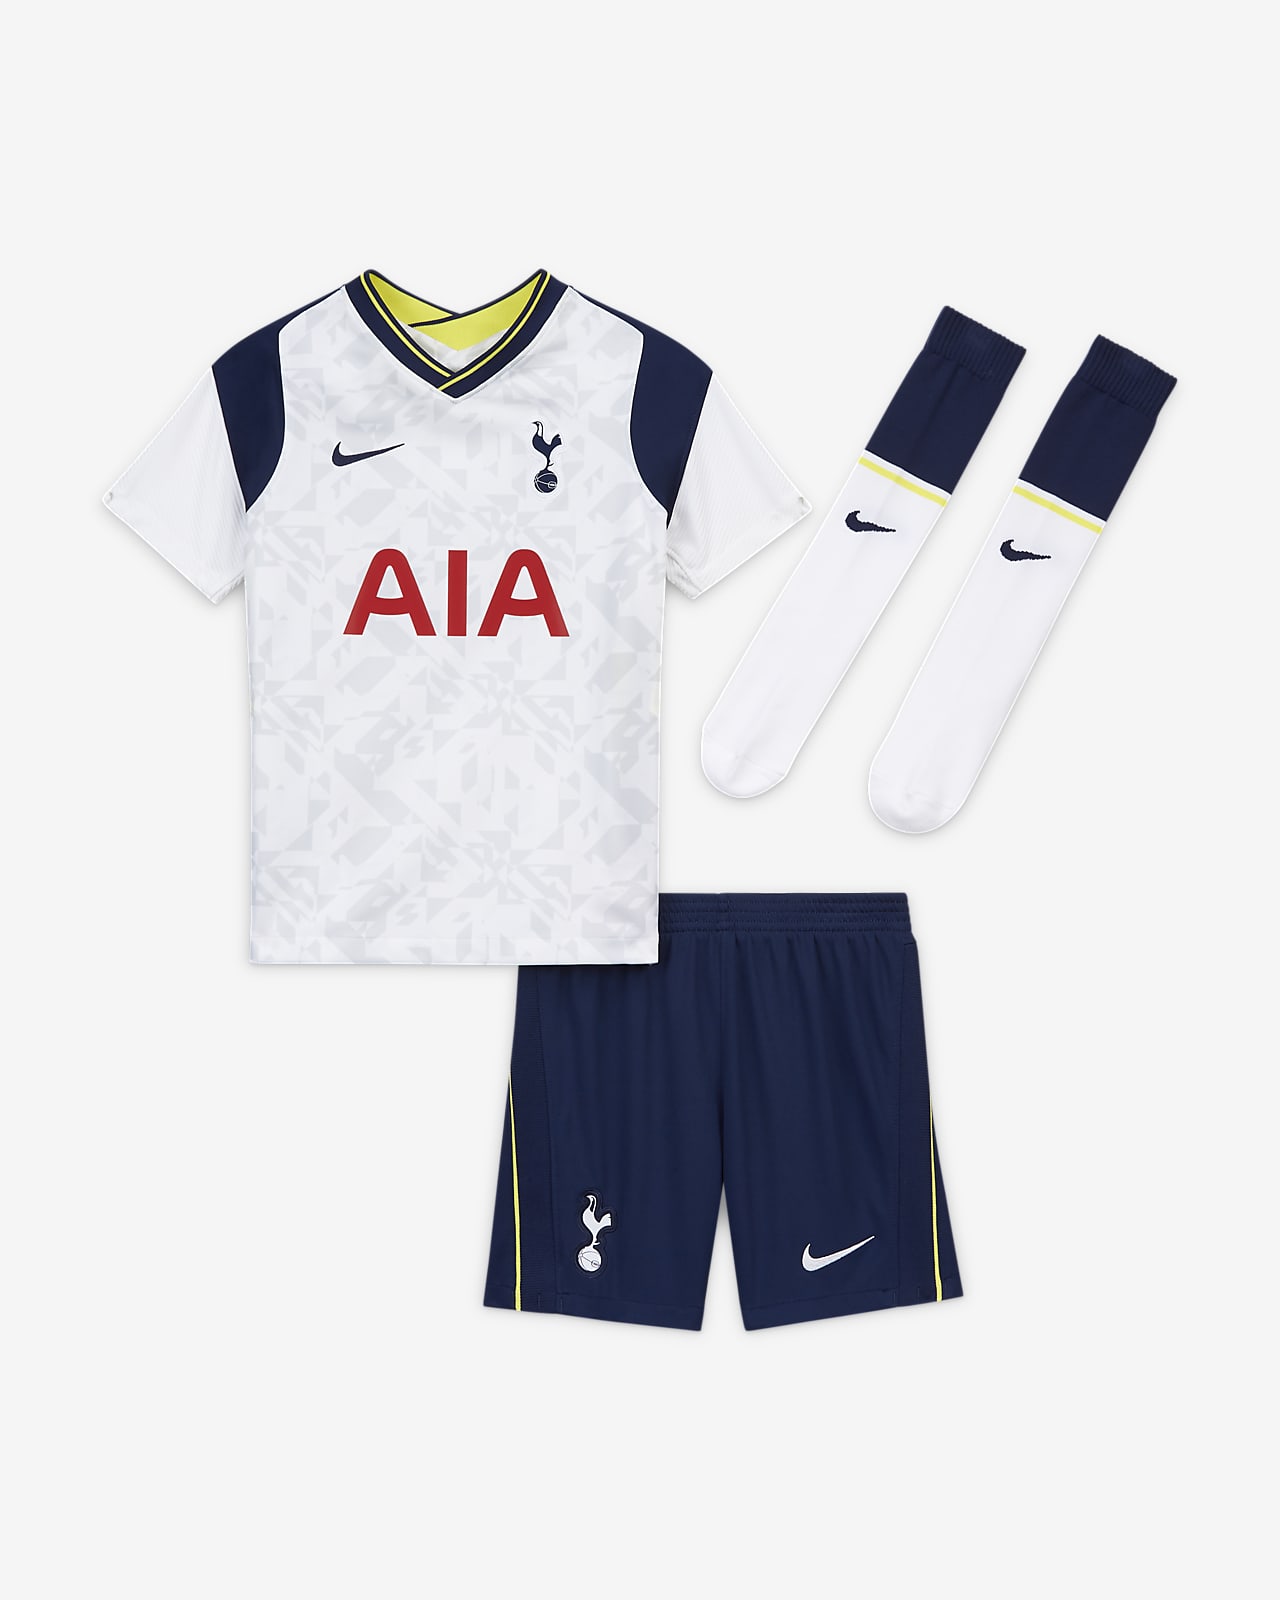 2020/21 Home Younger Kids' Football Kit 